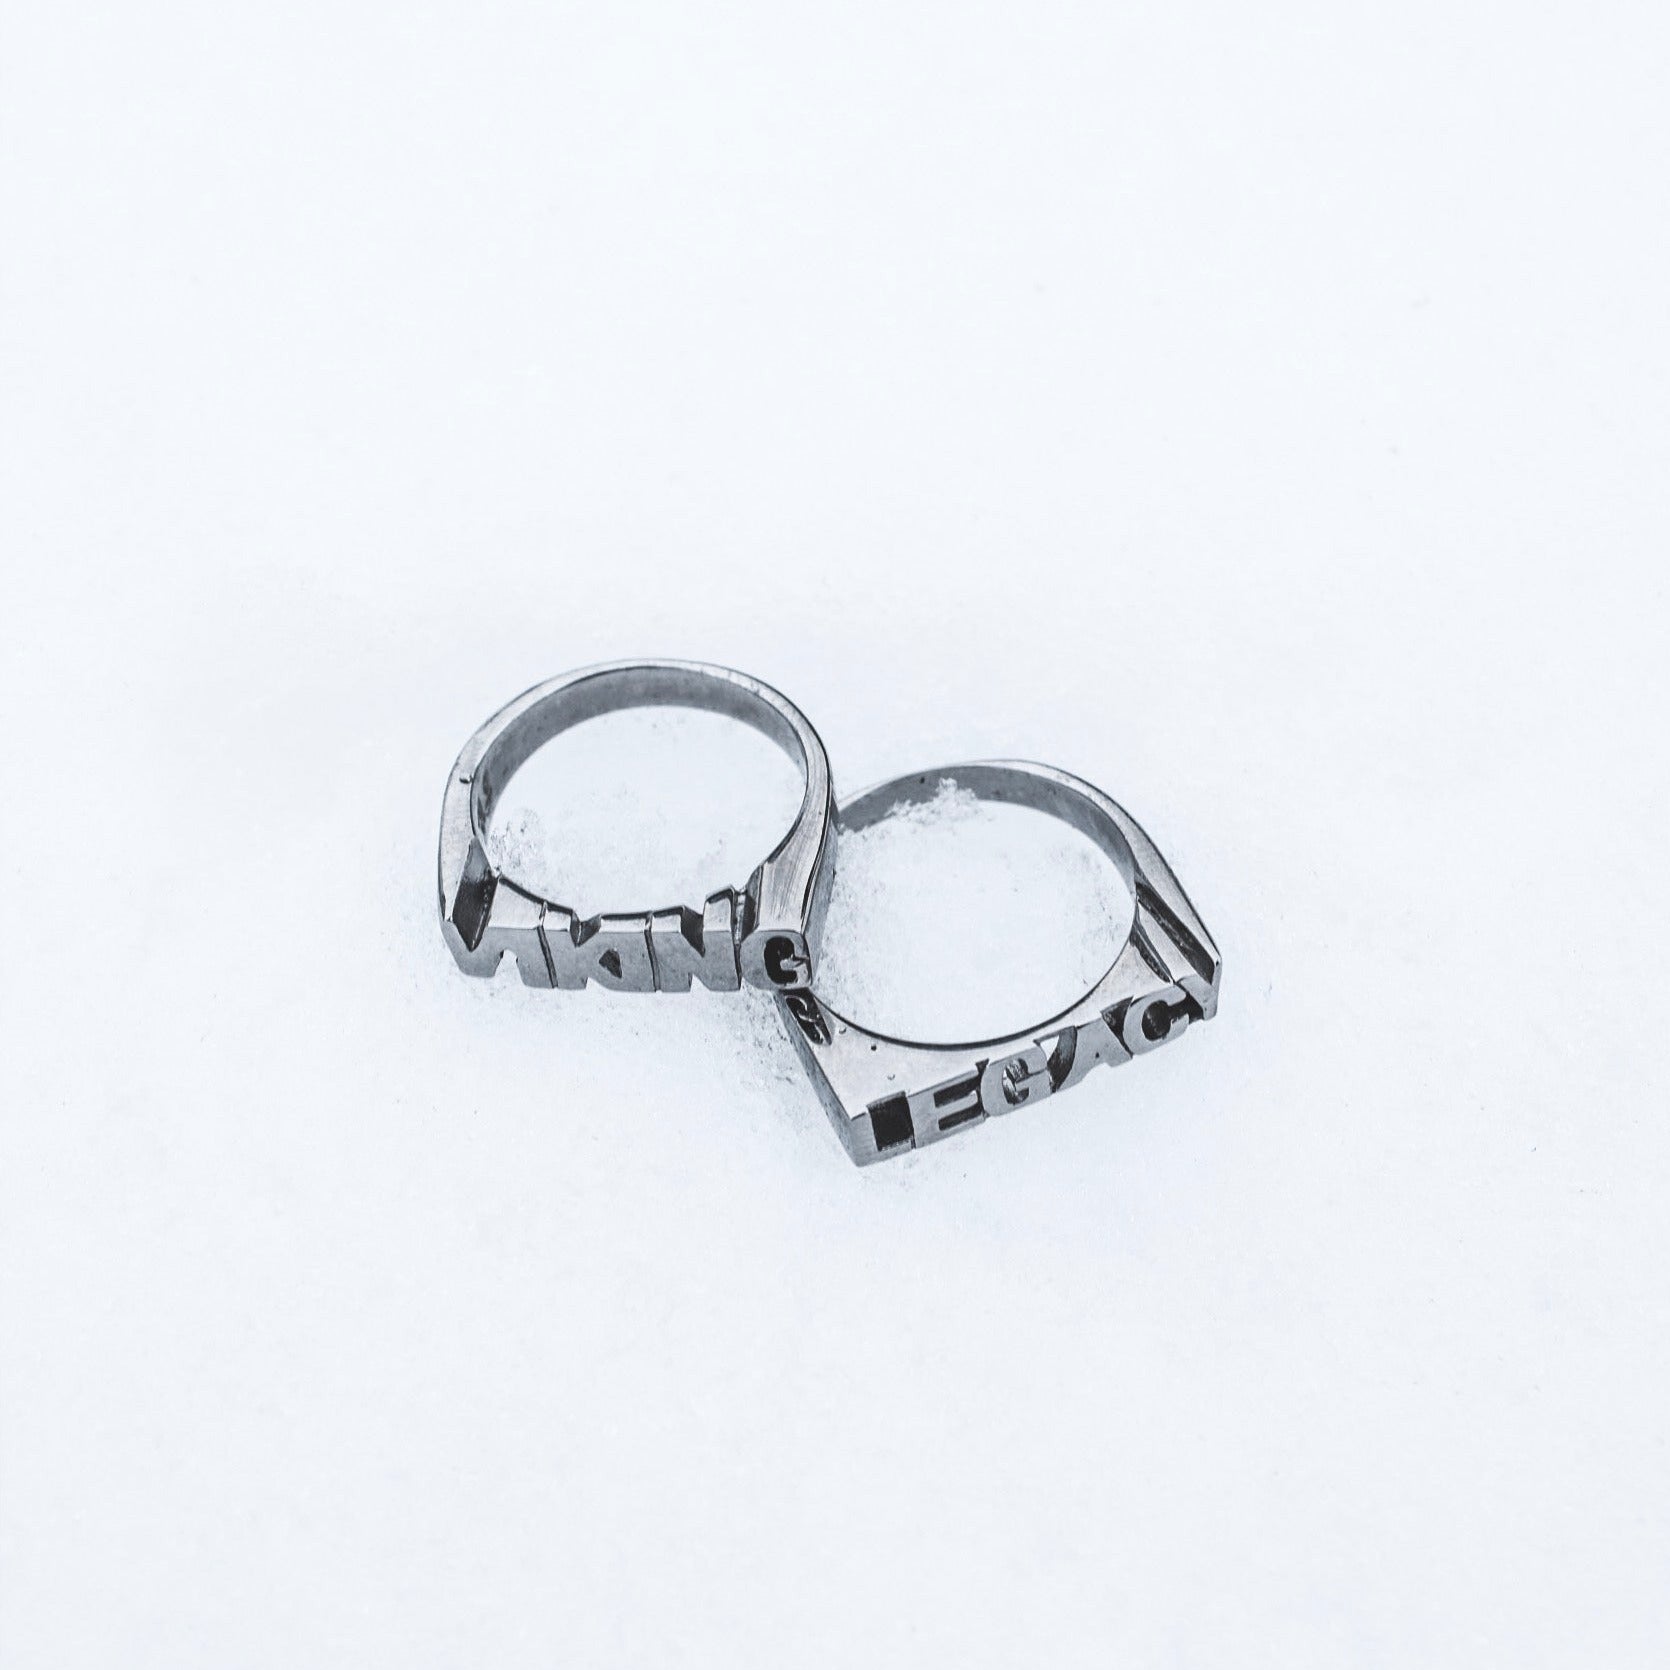 LEGACY Signature - Silver-toned ring